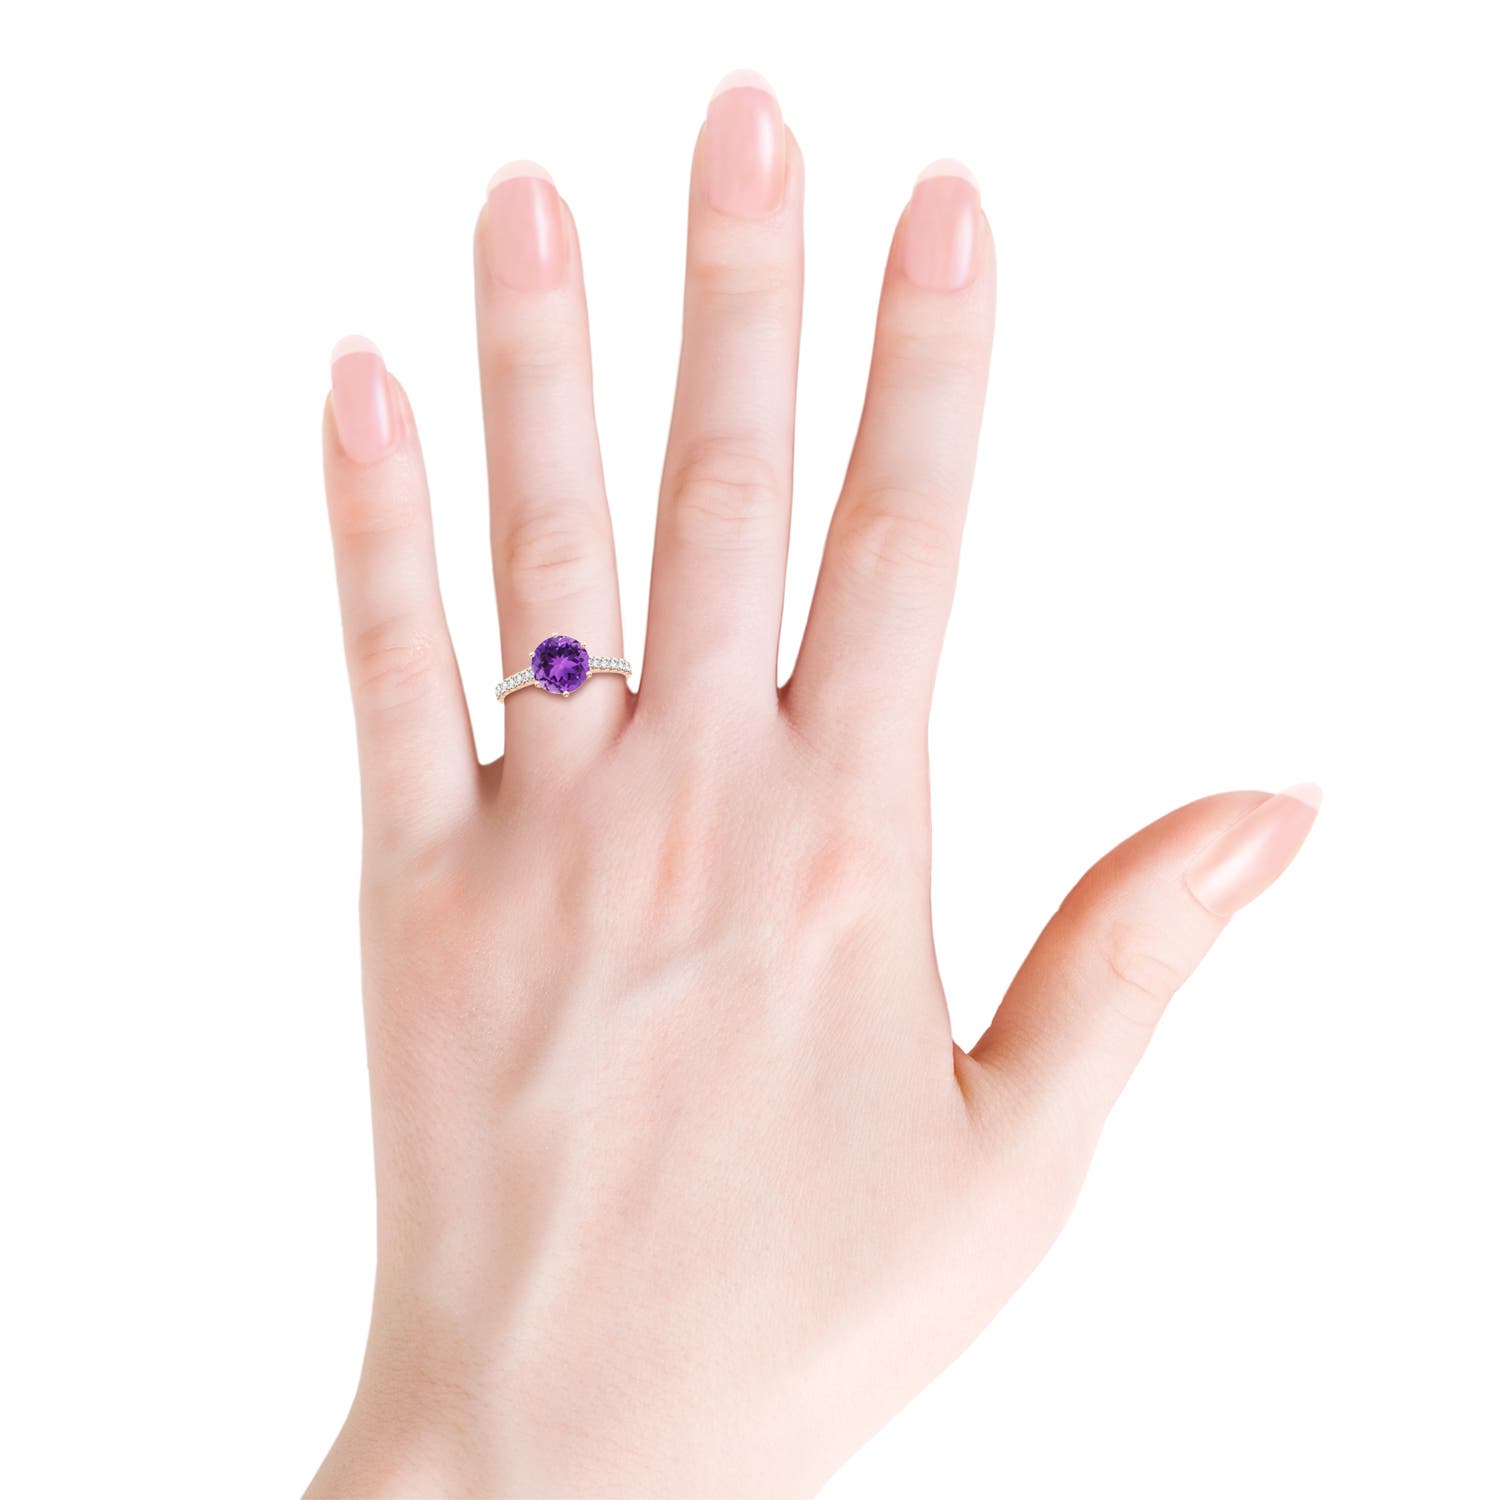 AAA - Amethyst / 2 CT / 14 KT Rose Gold